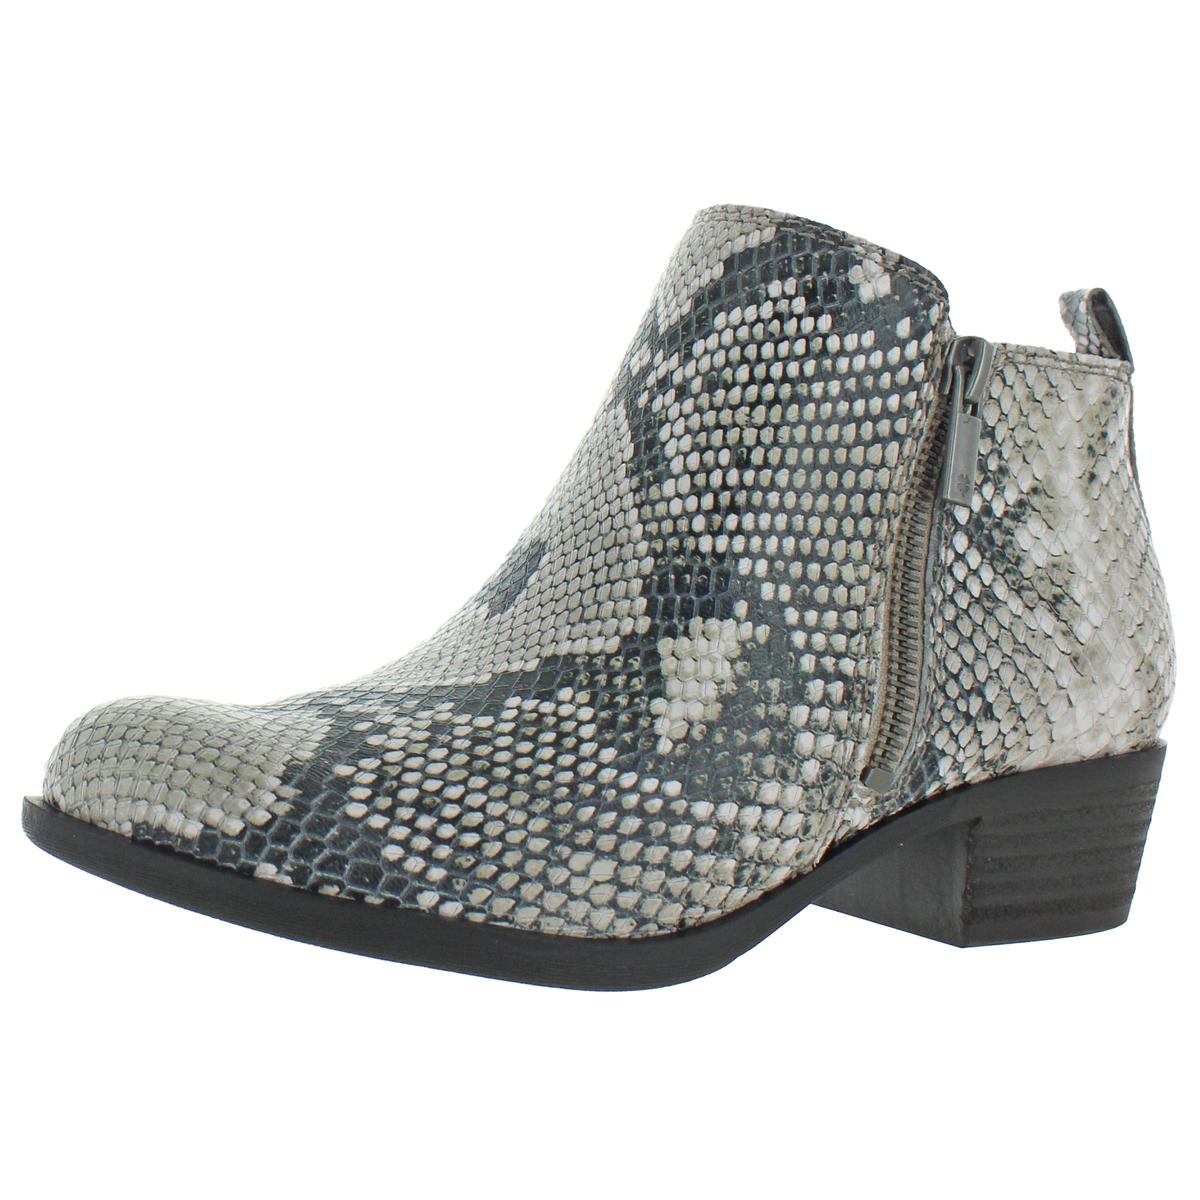 Lucky Brand Womens Basel B/W Snake Ankle Boots Shoes 8.5 Medium (B,M ...